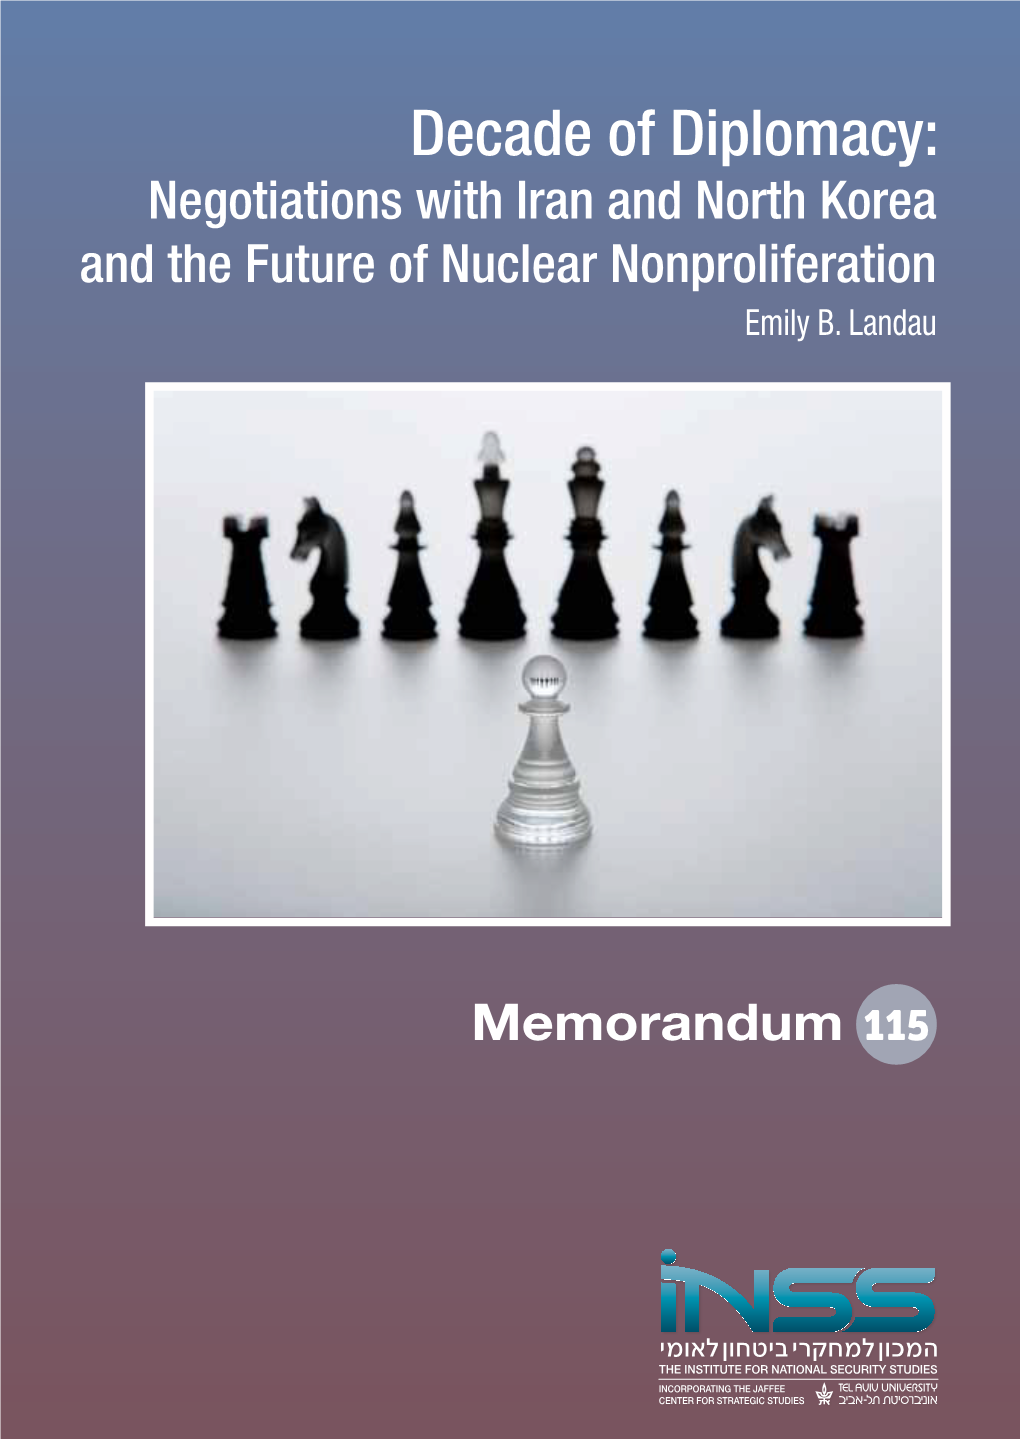 Negotiations with Iran and North Korea and the Future of Nuclear Nonproliferation Emily B